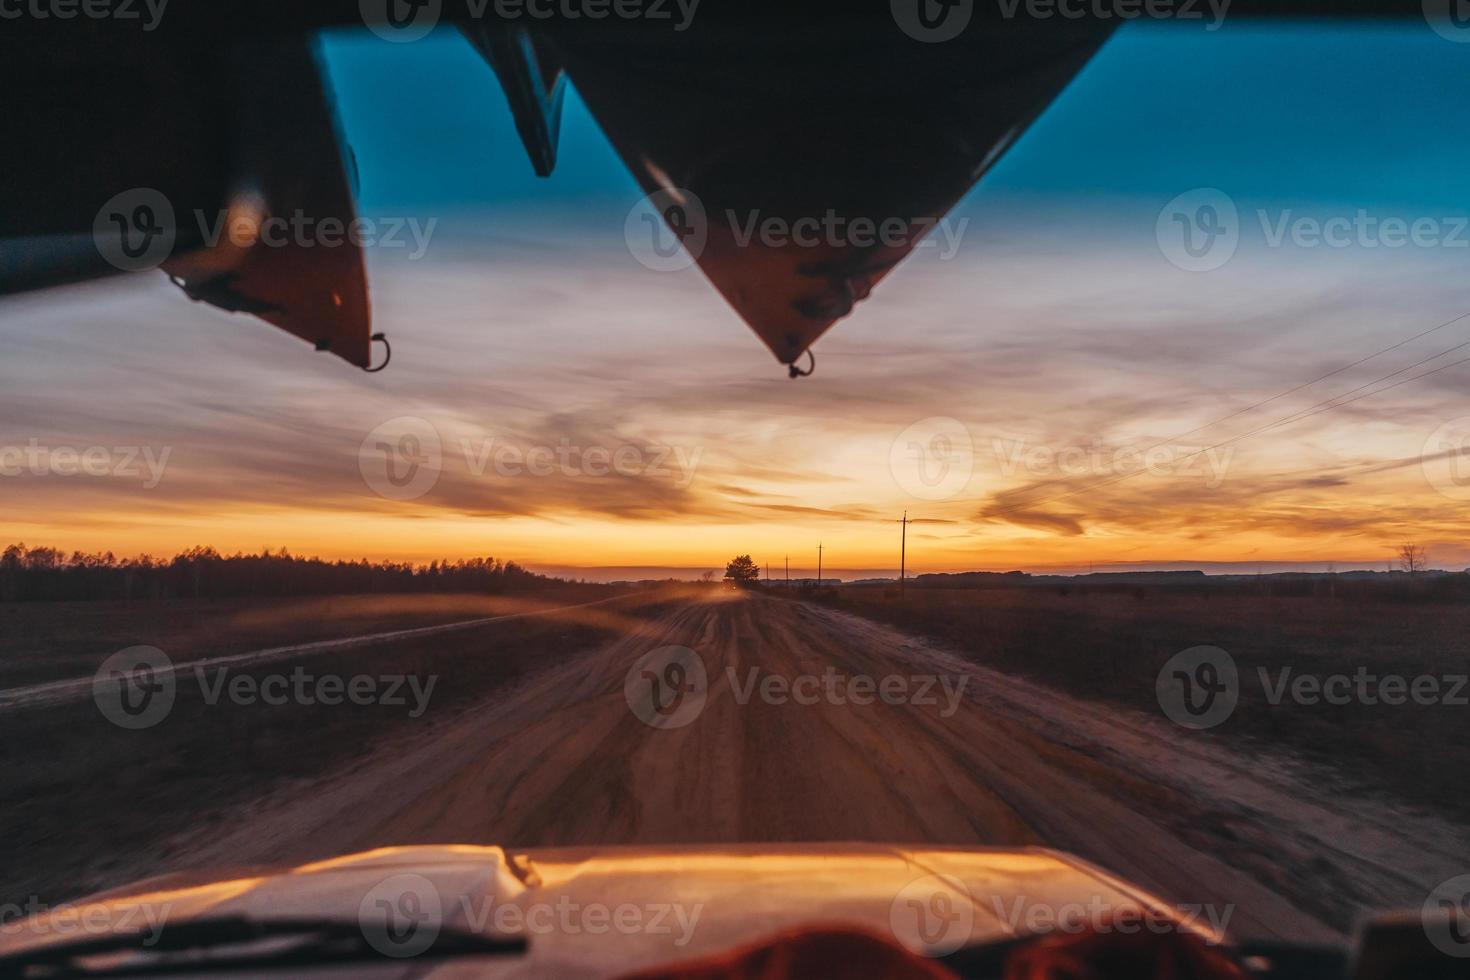 SUV driving on a dirt road view through the windshield photo